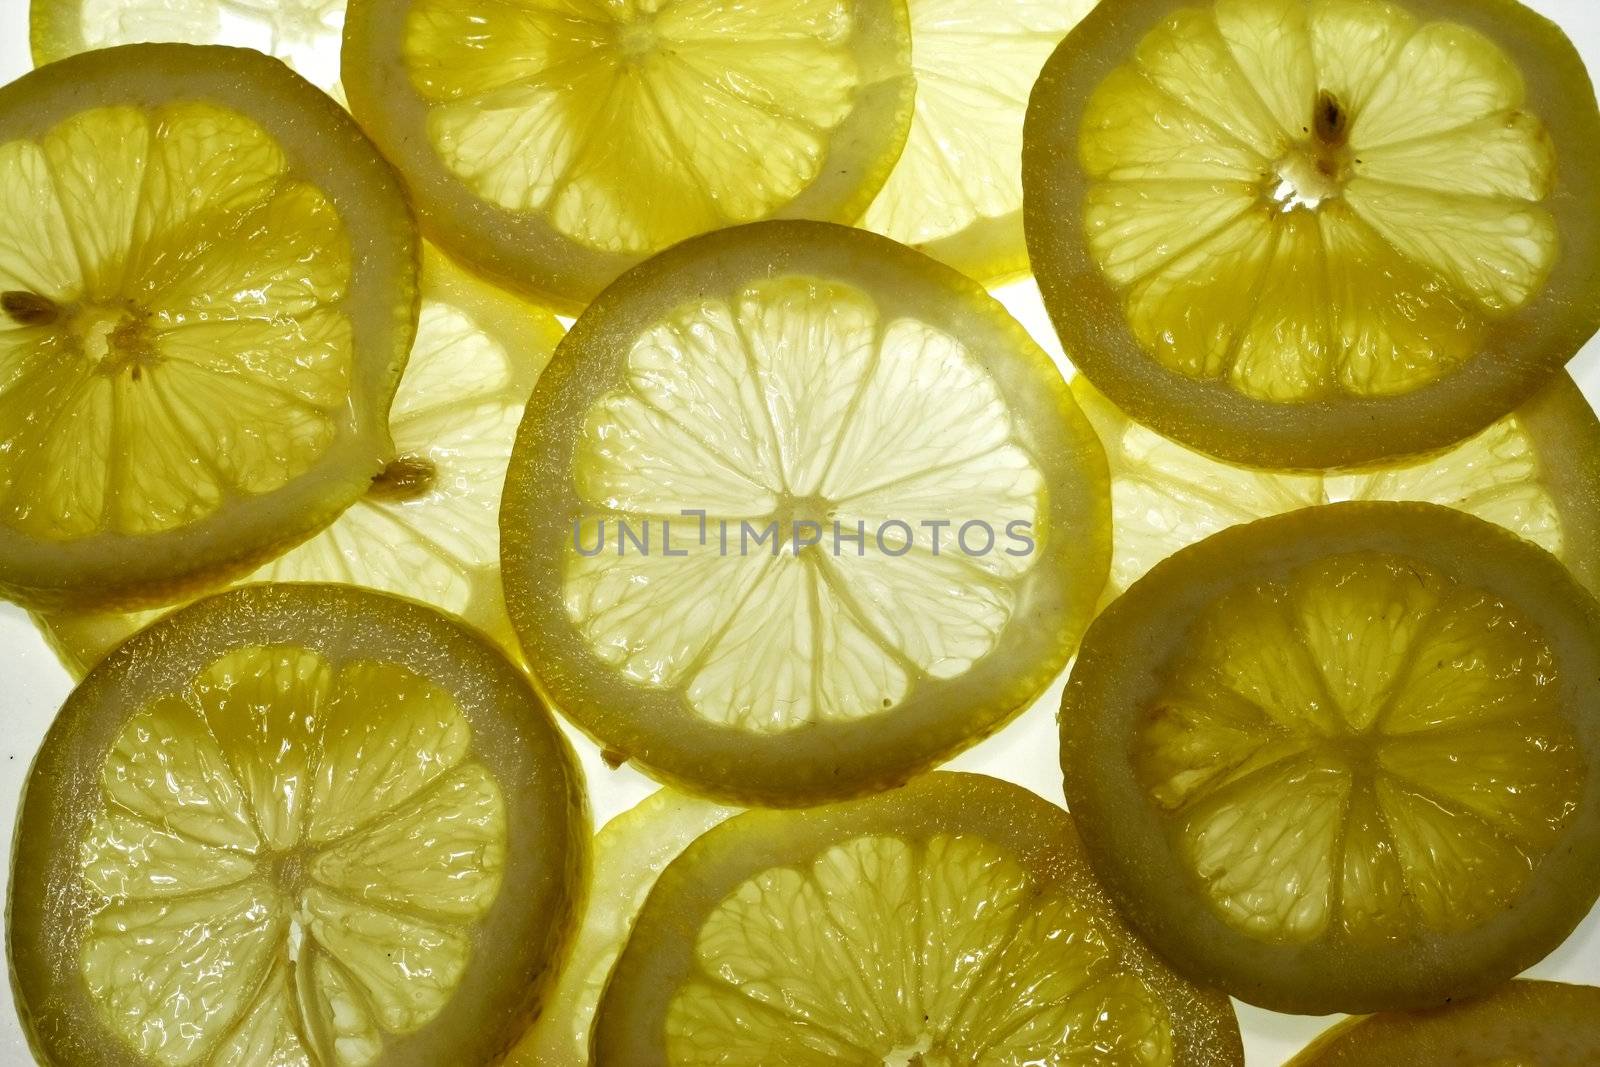 Lemon Thin Slices with light underneath to show highlight of the texture